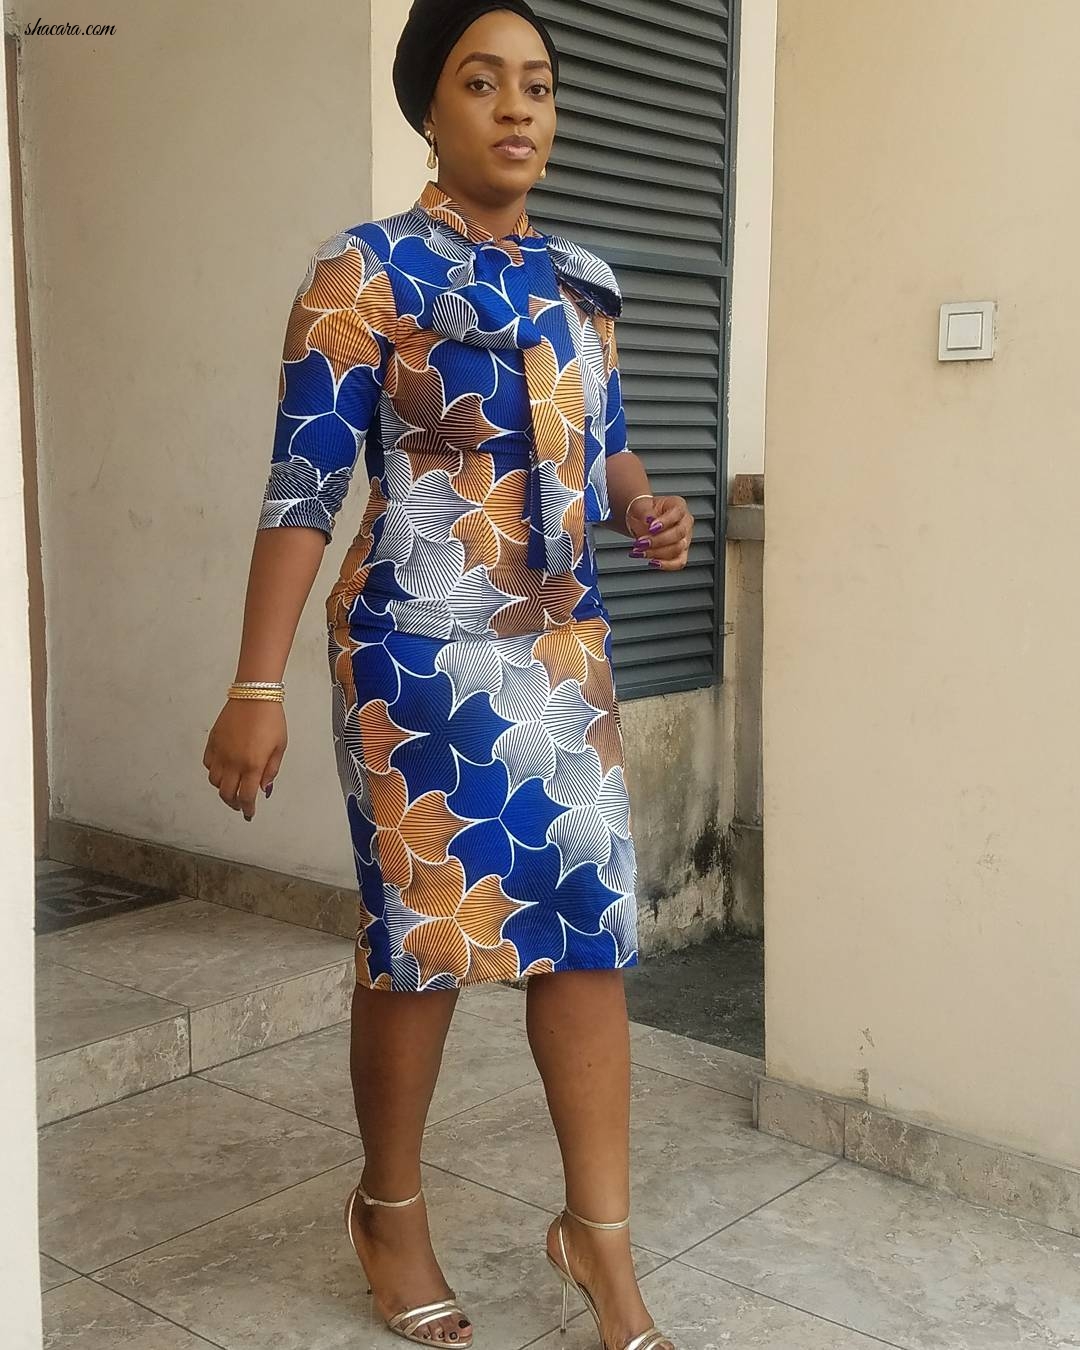 LATEST ANKARA STYLES THAT WE FELL IN LOVE WITH OVER THE WEEKEND